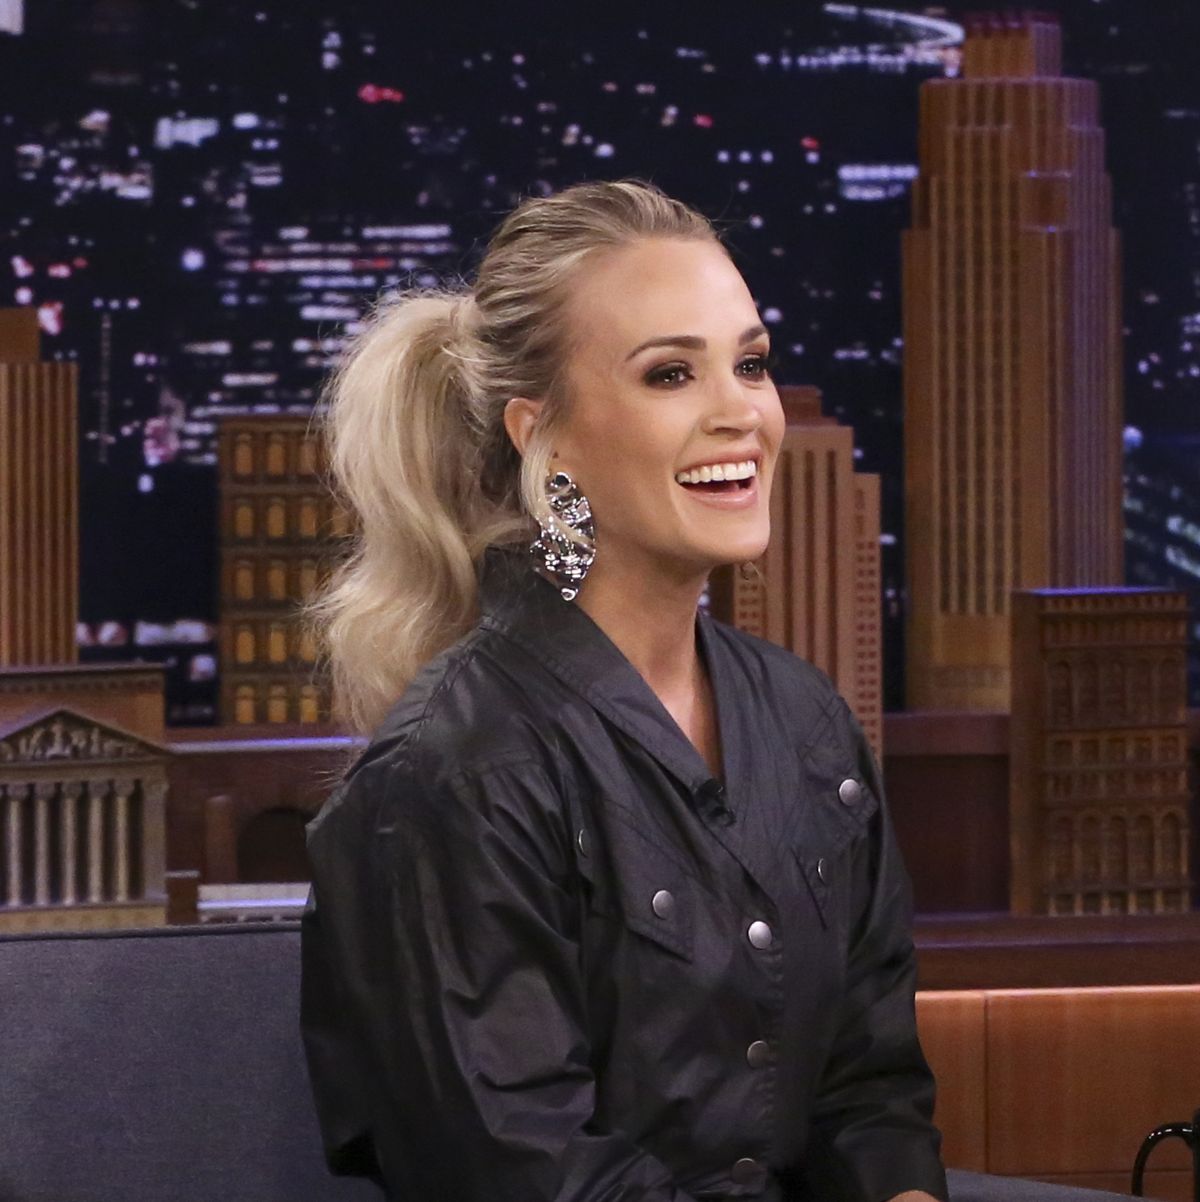 https://hips.hearstapps.com/hmg-prod/images/carrie-underwood-1583961255.jpg?crop=1.00xw:0.667xh;0,0.0694xh&resize=1200:*